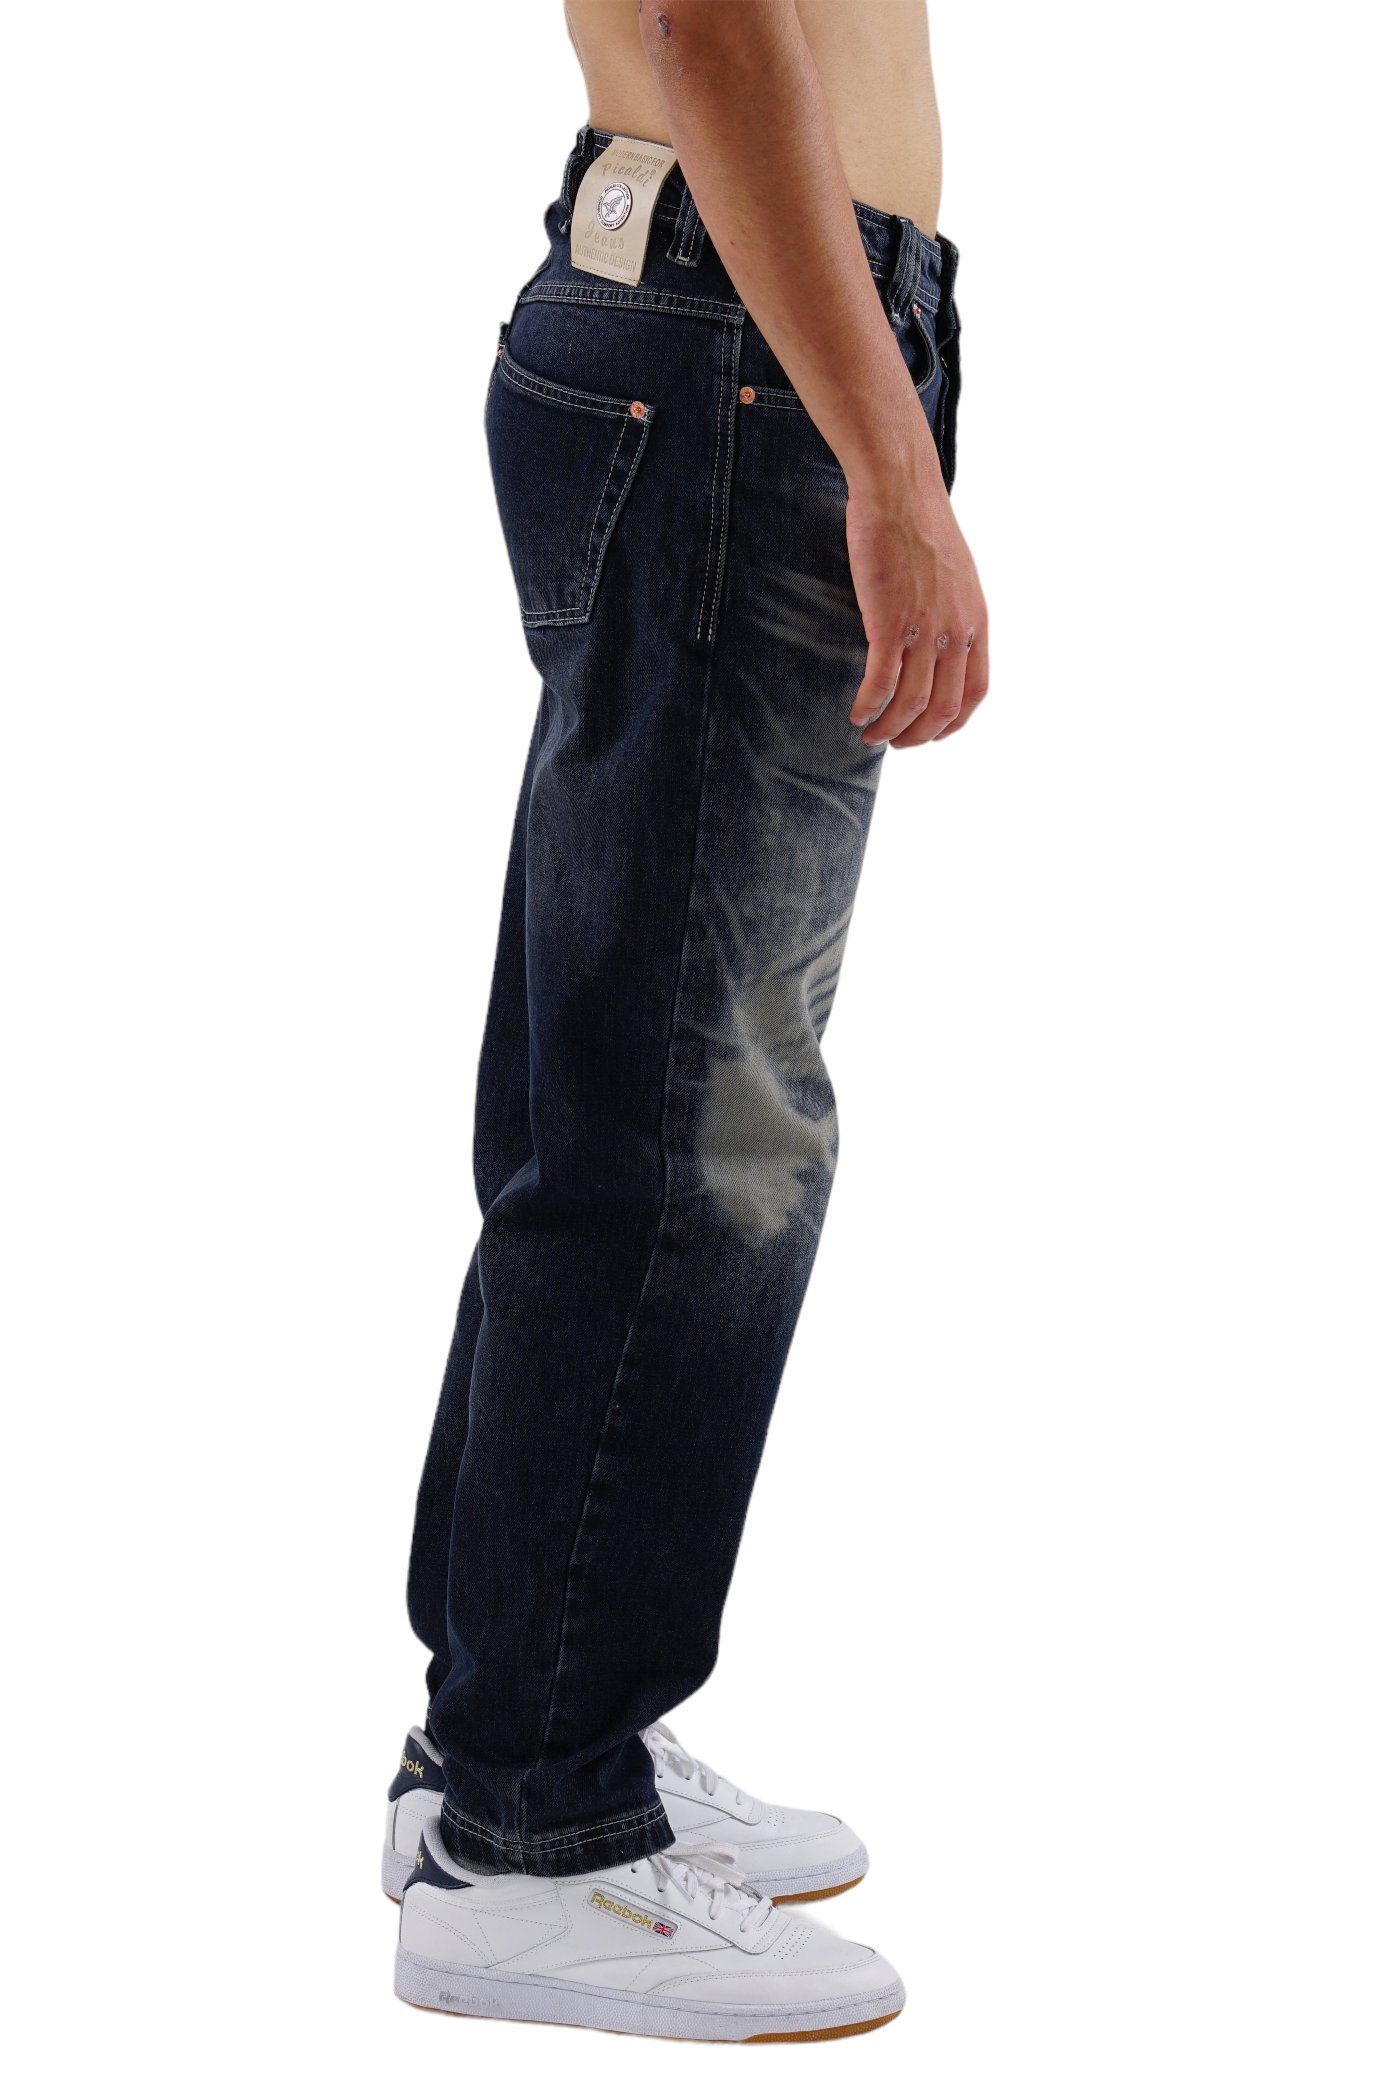 Fit, Loose Eldorado 472 Jeans Fit Weite Jeans PICALDI Relaxed Zicco